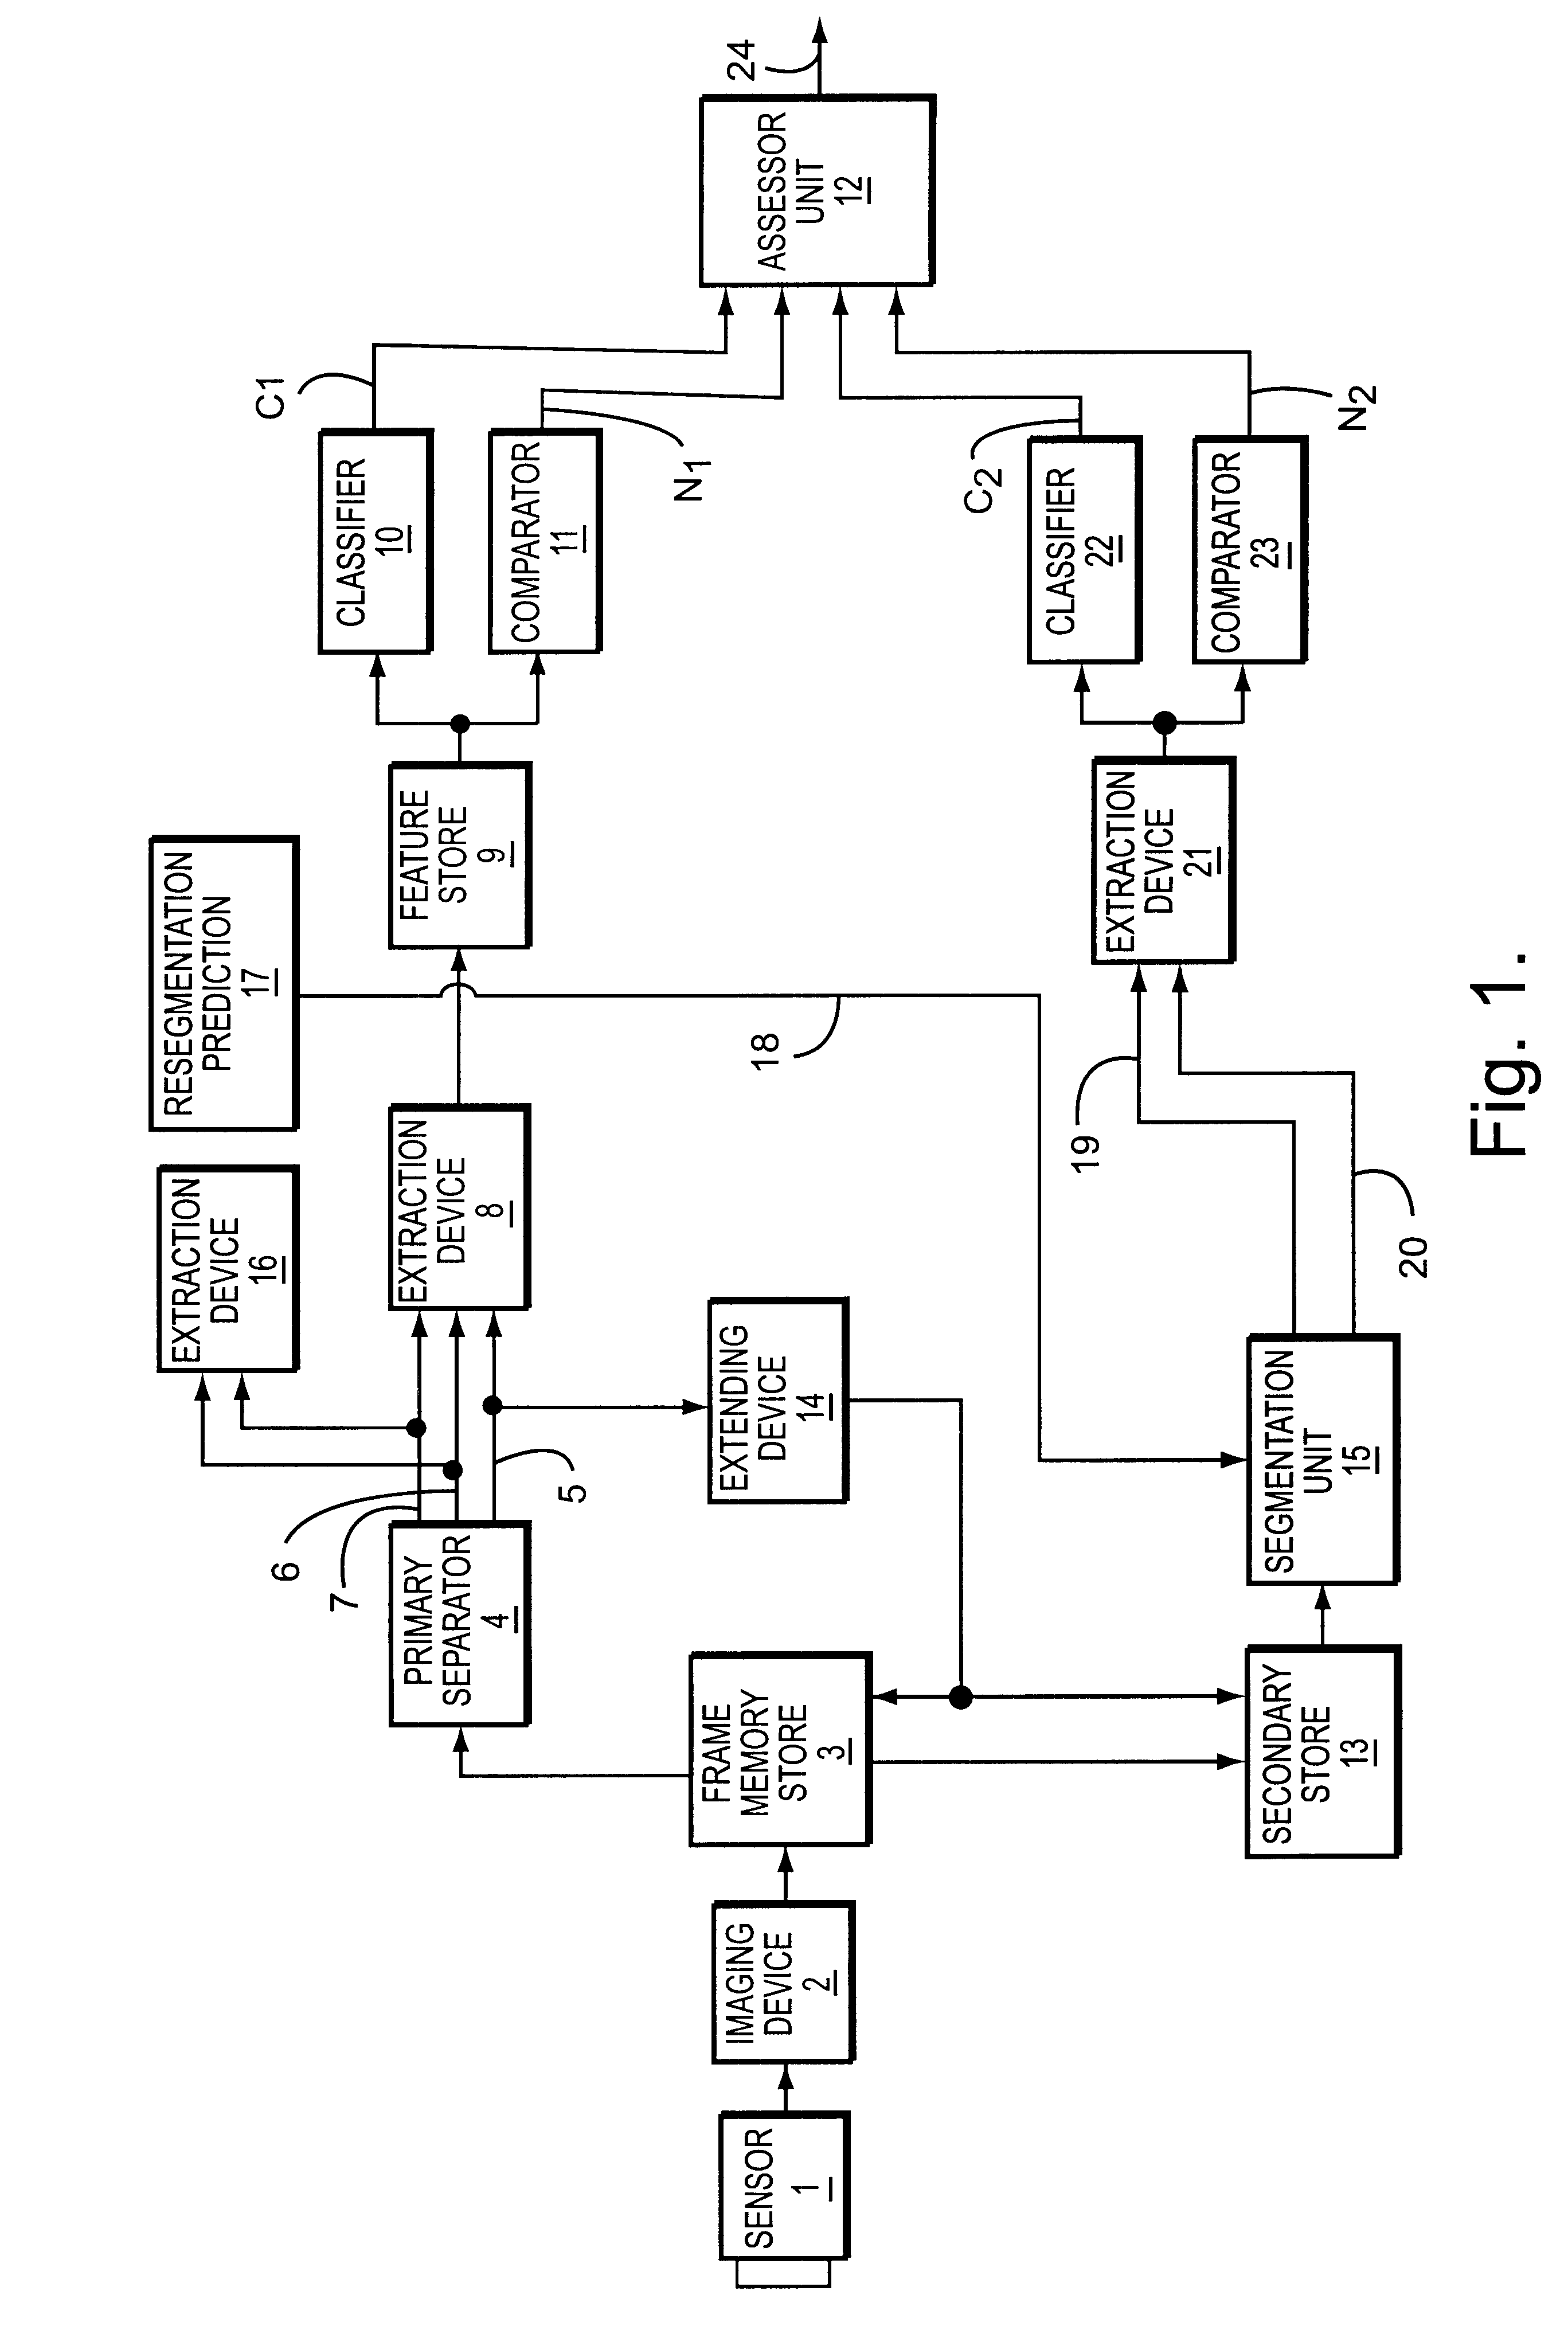 Automatic target recognition apparatus and process